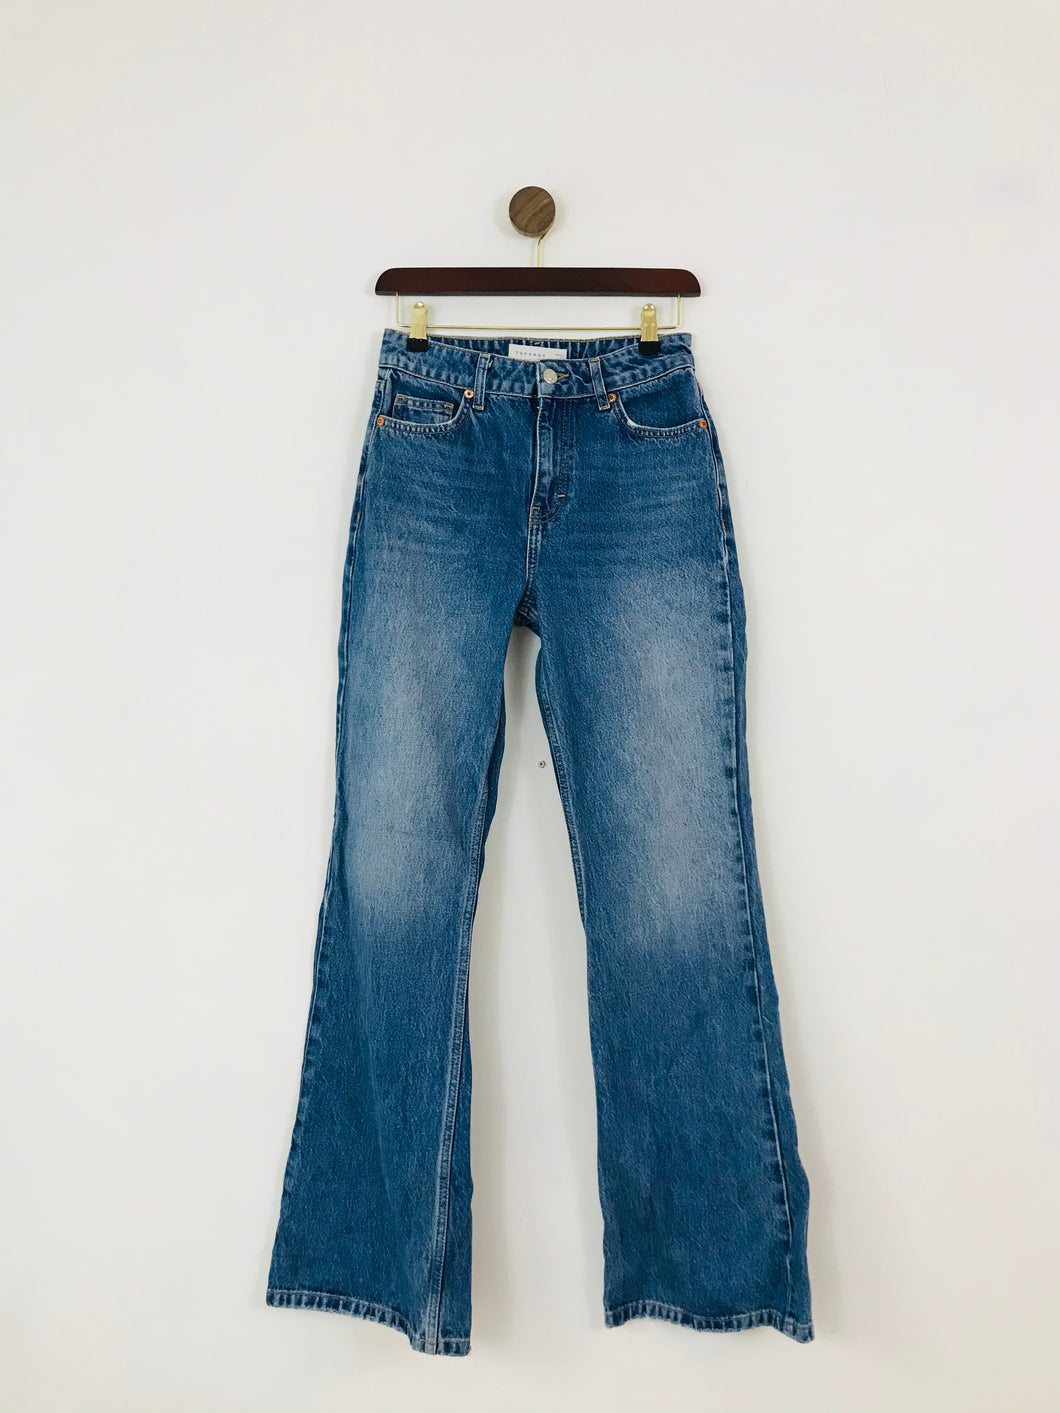 Topshop Women’s High Waisted Flare Jeans | 26 UK8 | Blue